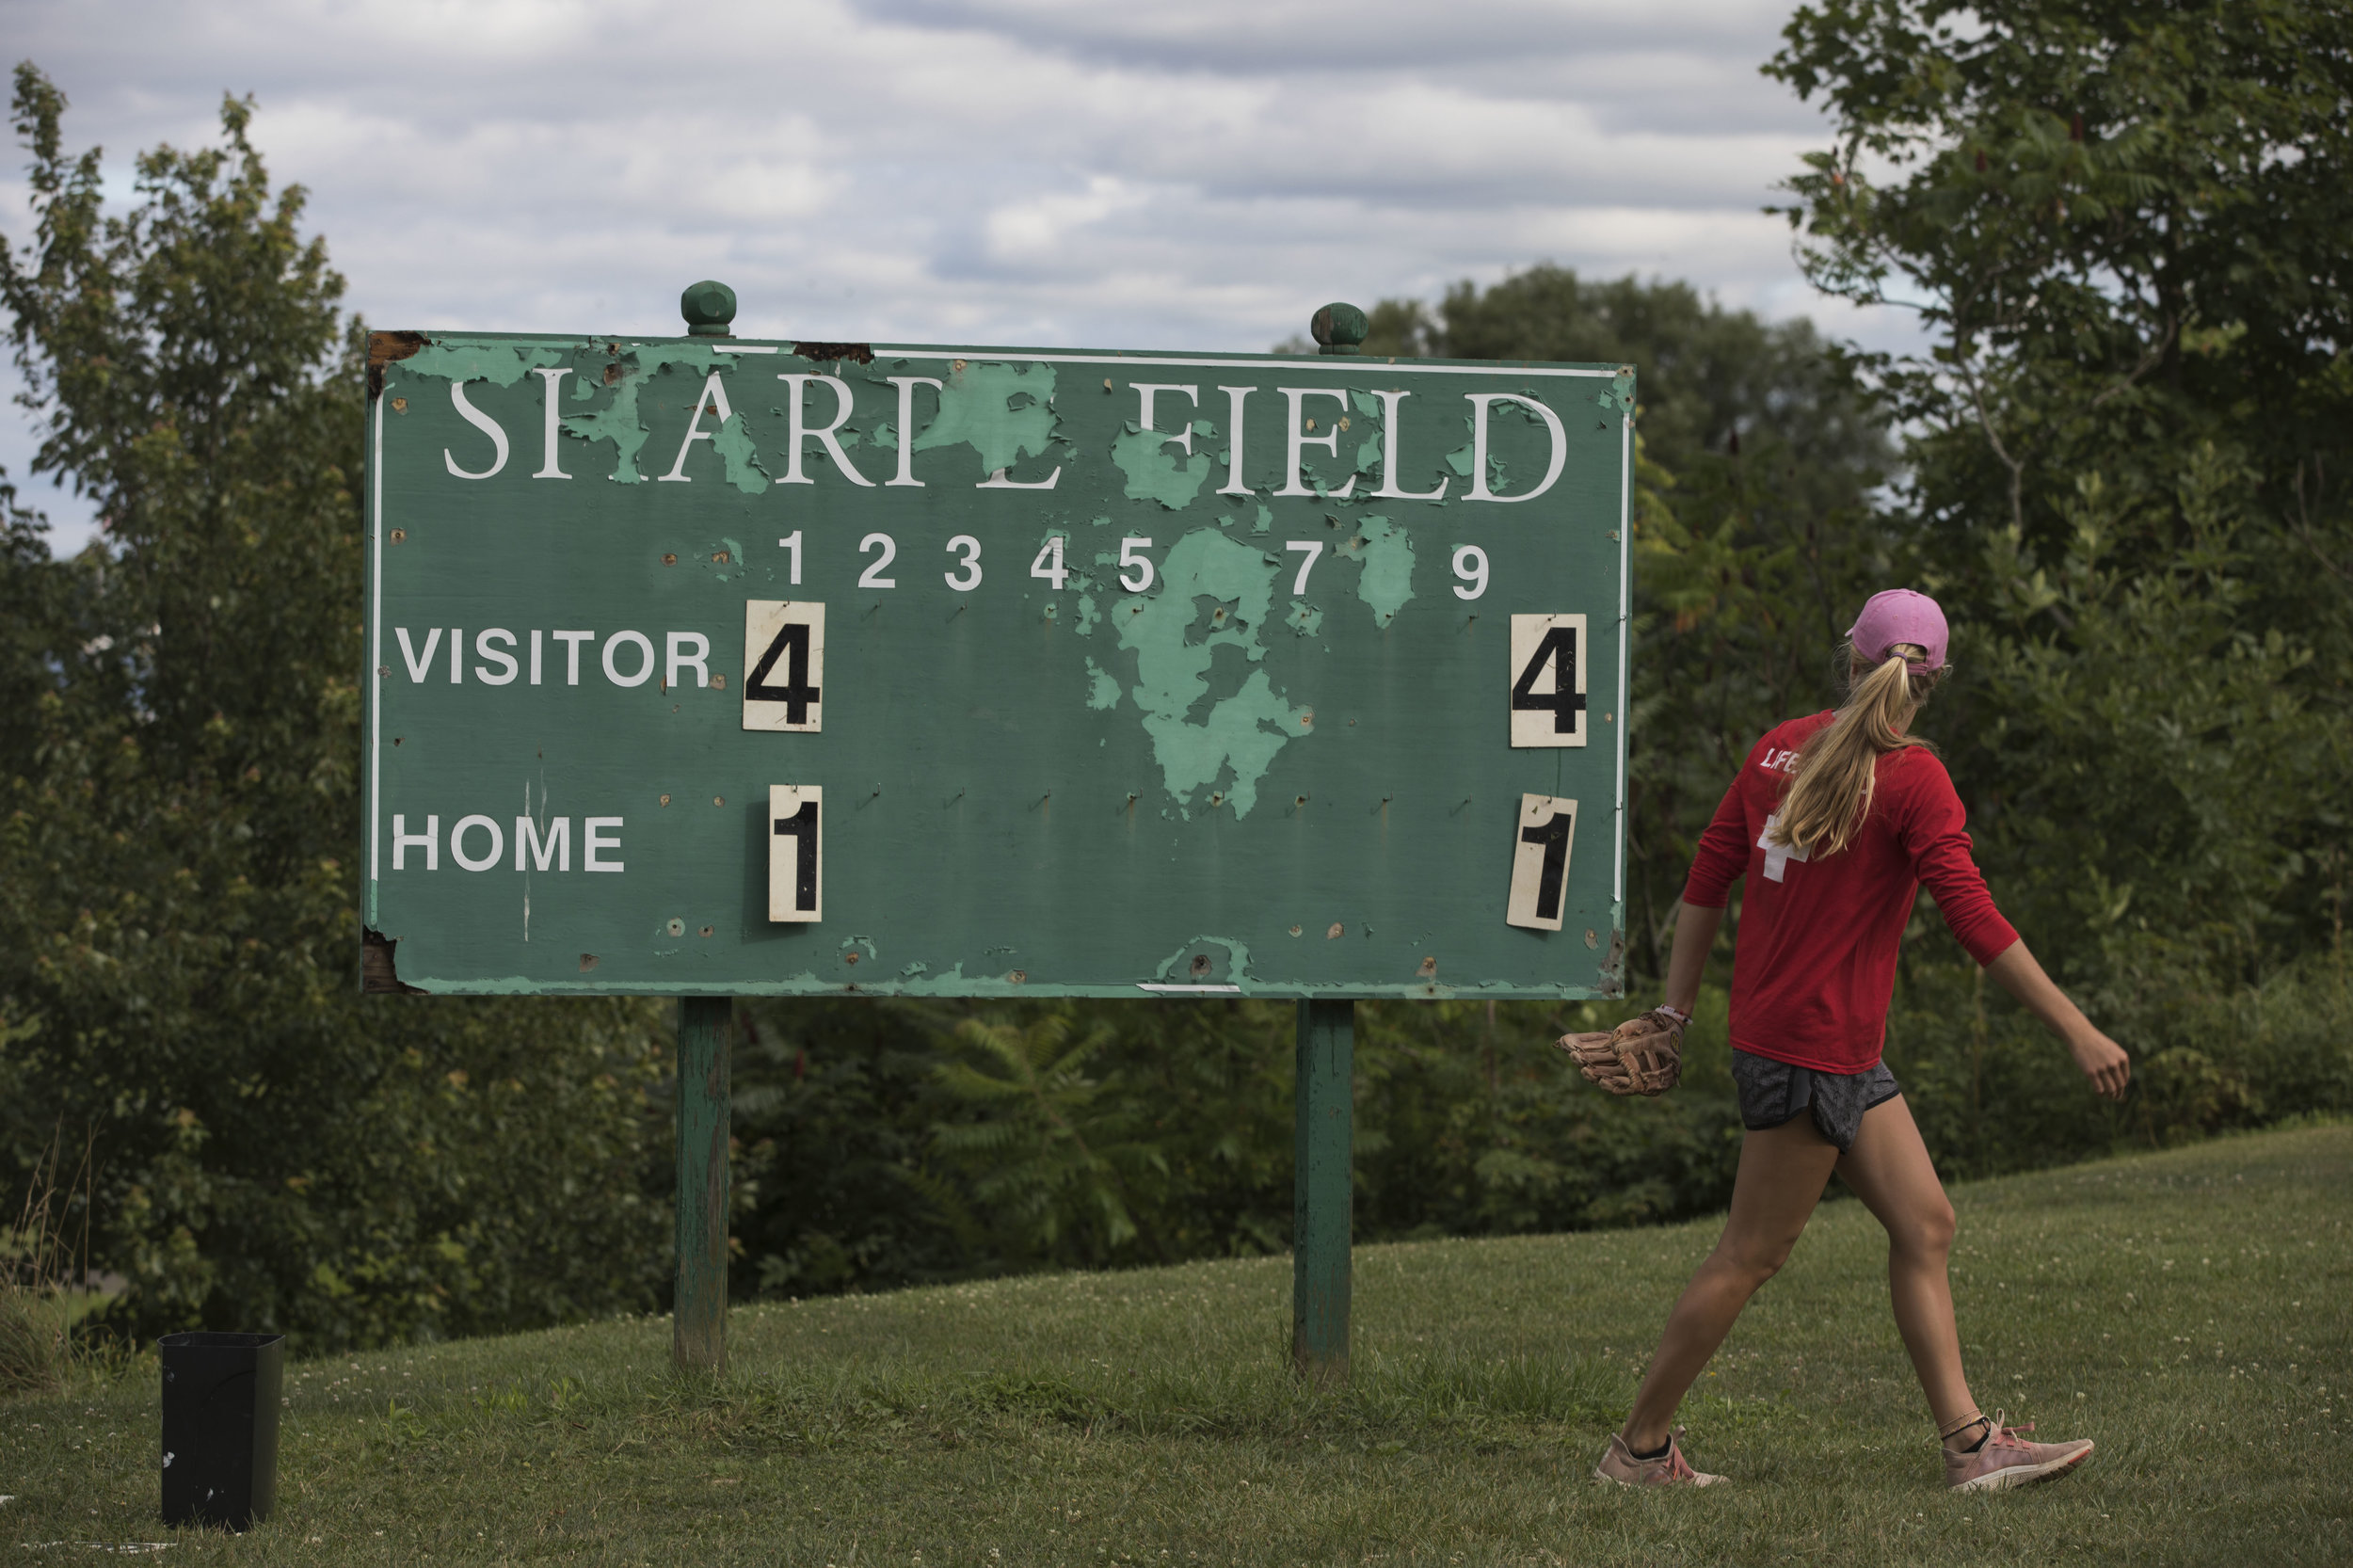  Gillian Lawton, member of Grilled Cheeselers softball team changes the scoreboard after the first inning of the playoff game against The Belles on Tuesday, July 25, 2017 in sharpe field. The Grilled Cheeselers won 29-8.&nbsp; 